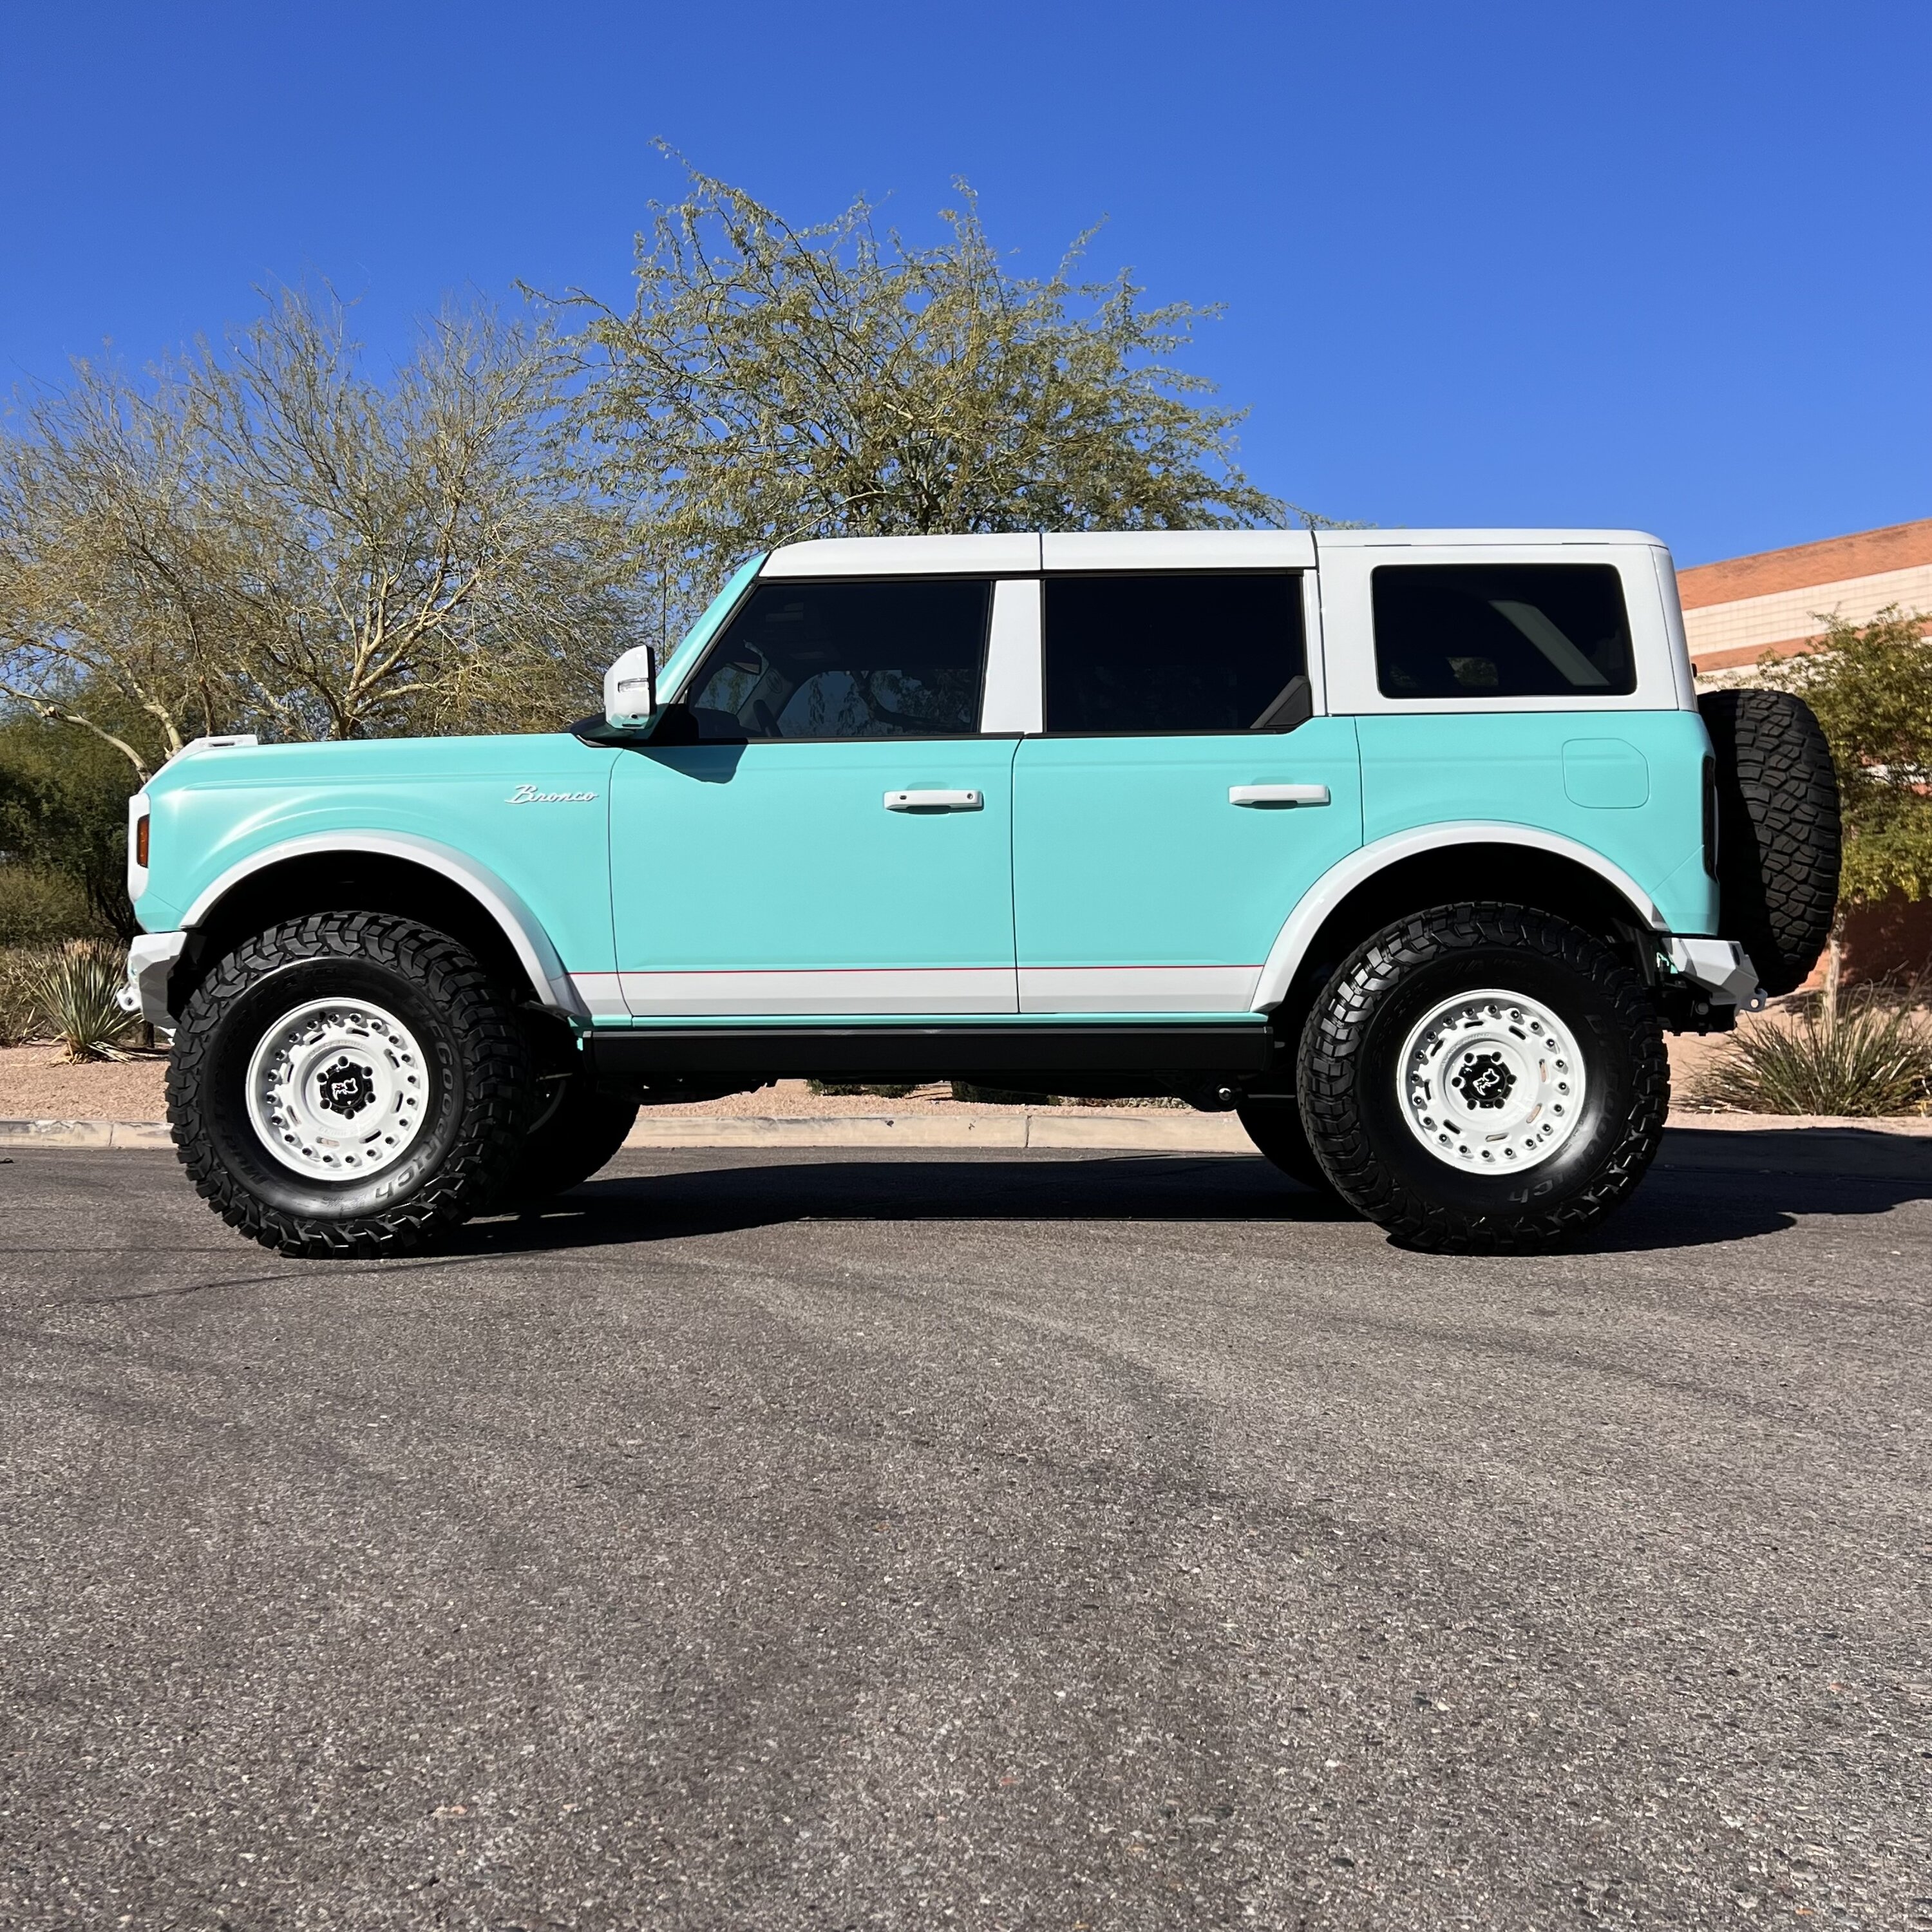 Ford Bronco Full color change: Tiffany paint on retro Bronco build by Doetsch Offroad IMG_0517